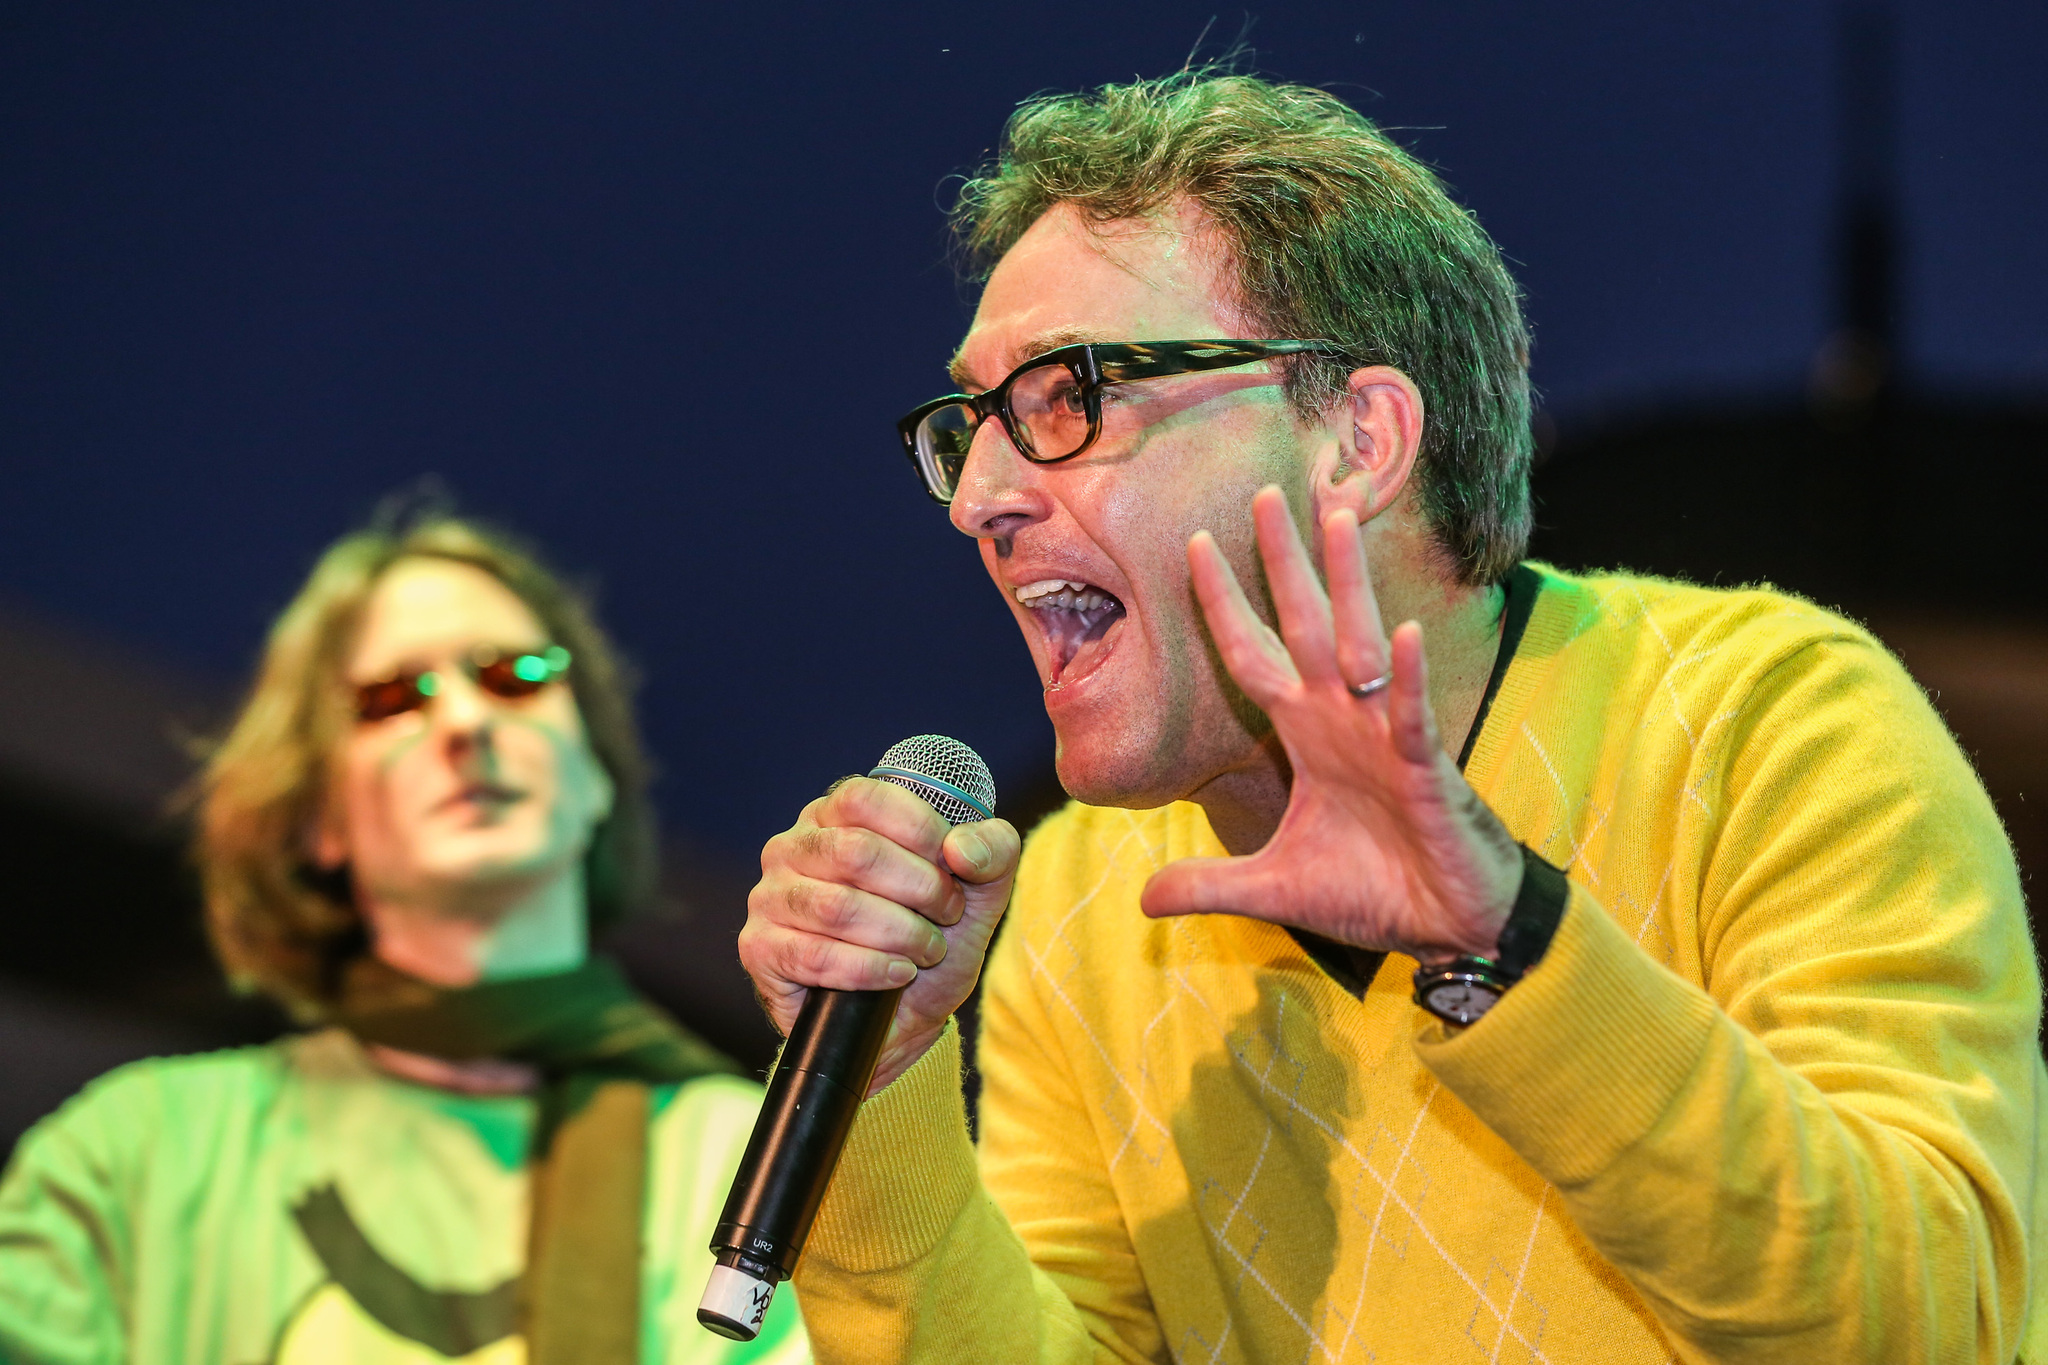 Tom Kenny and Mr. Lawrence